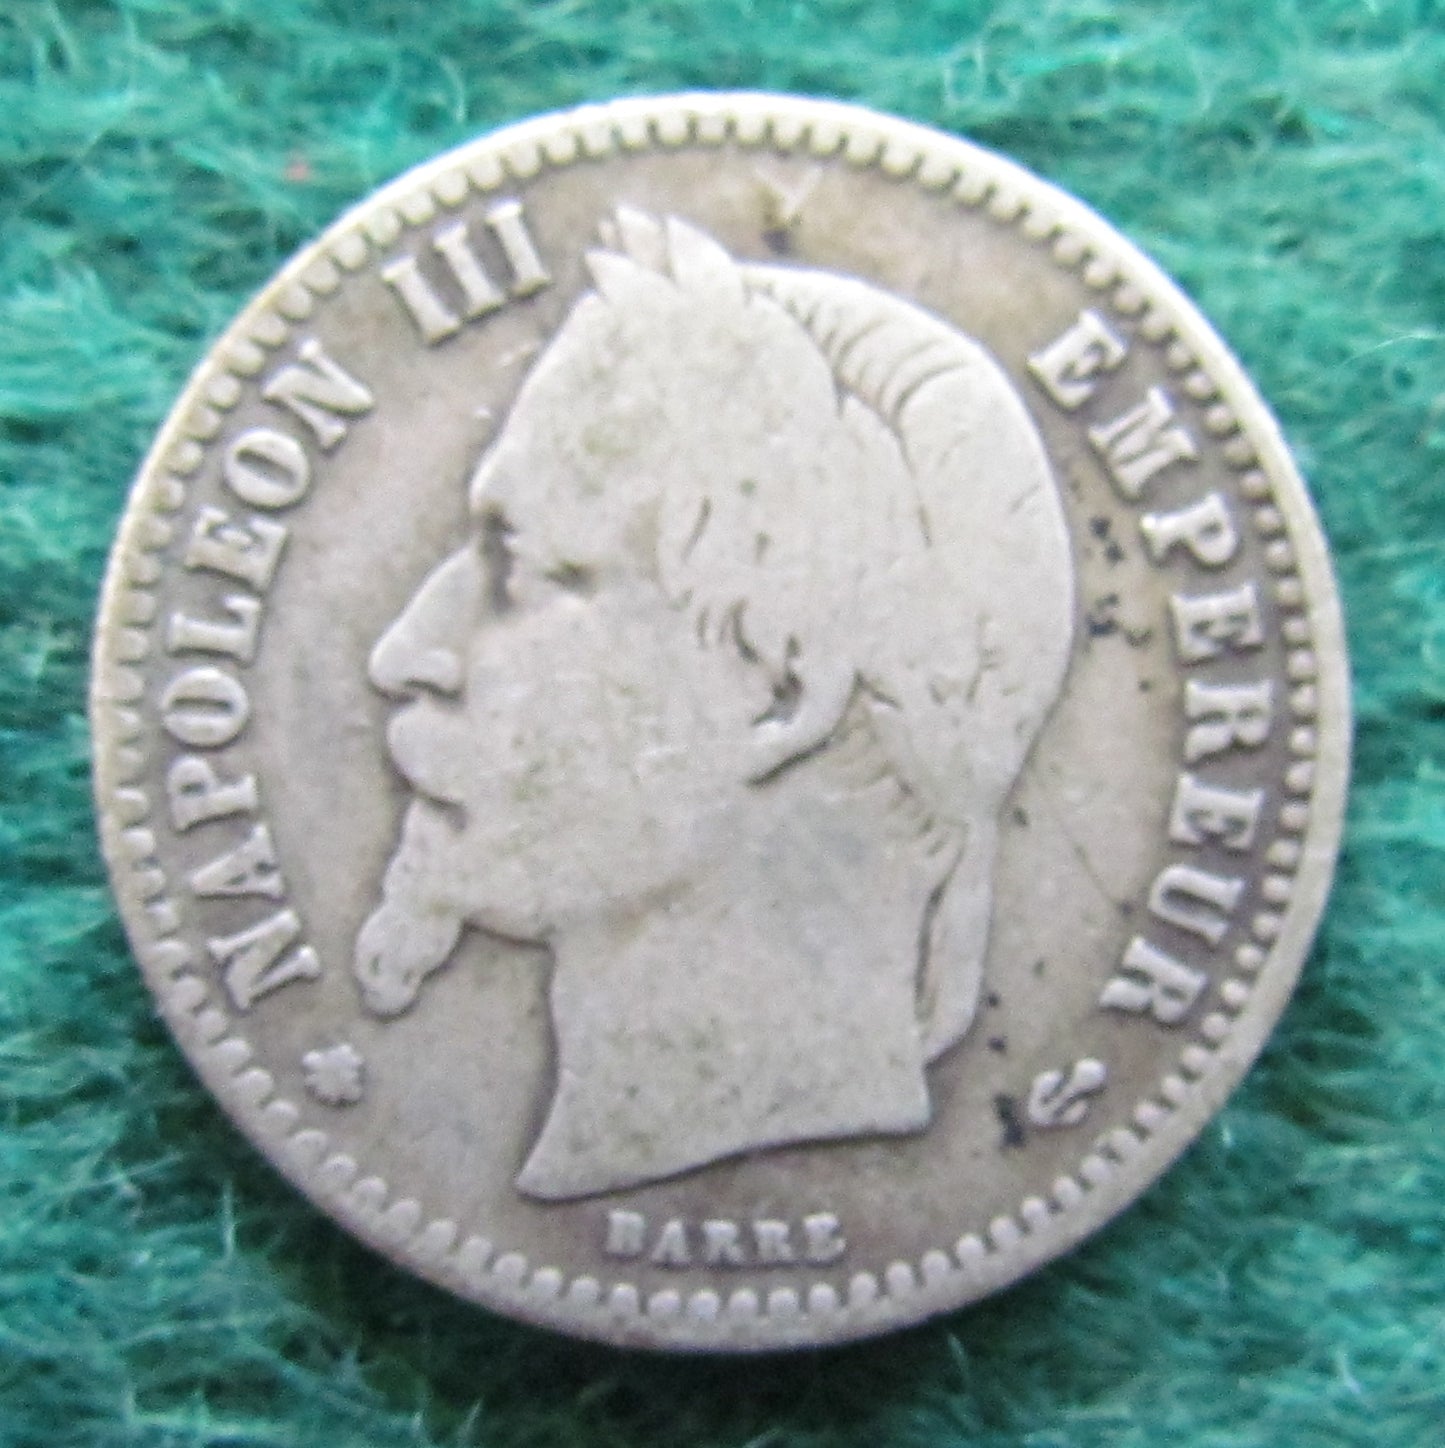 French 1864 50 Centimes Coin - Napolion III